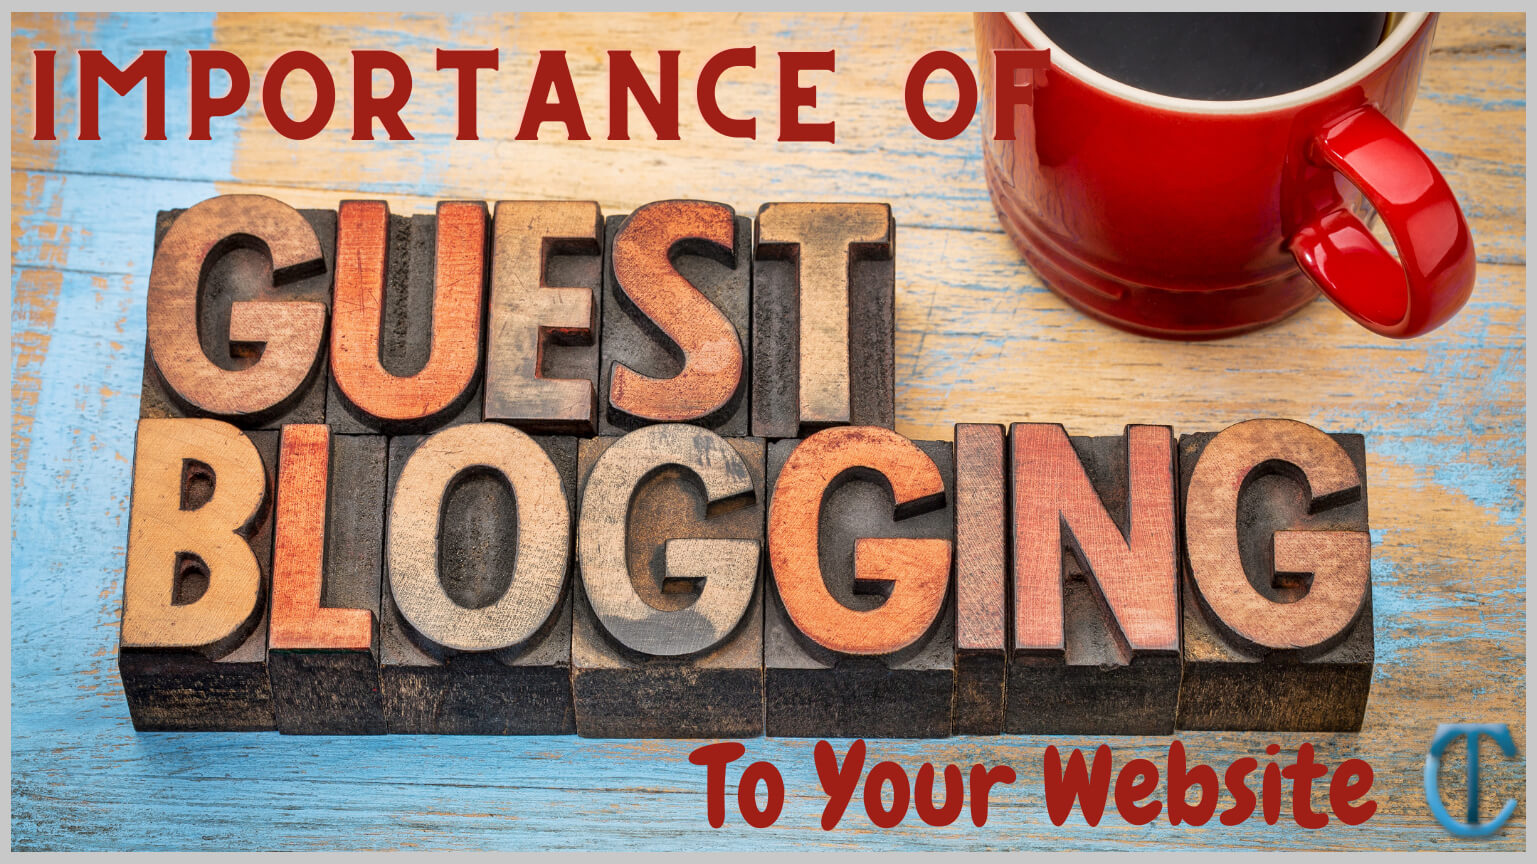 What Is The Importance Of Using Guest Posting To Your Website?